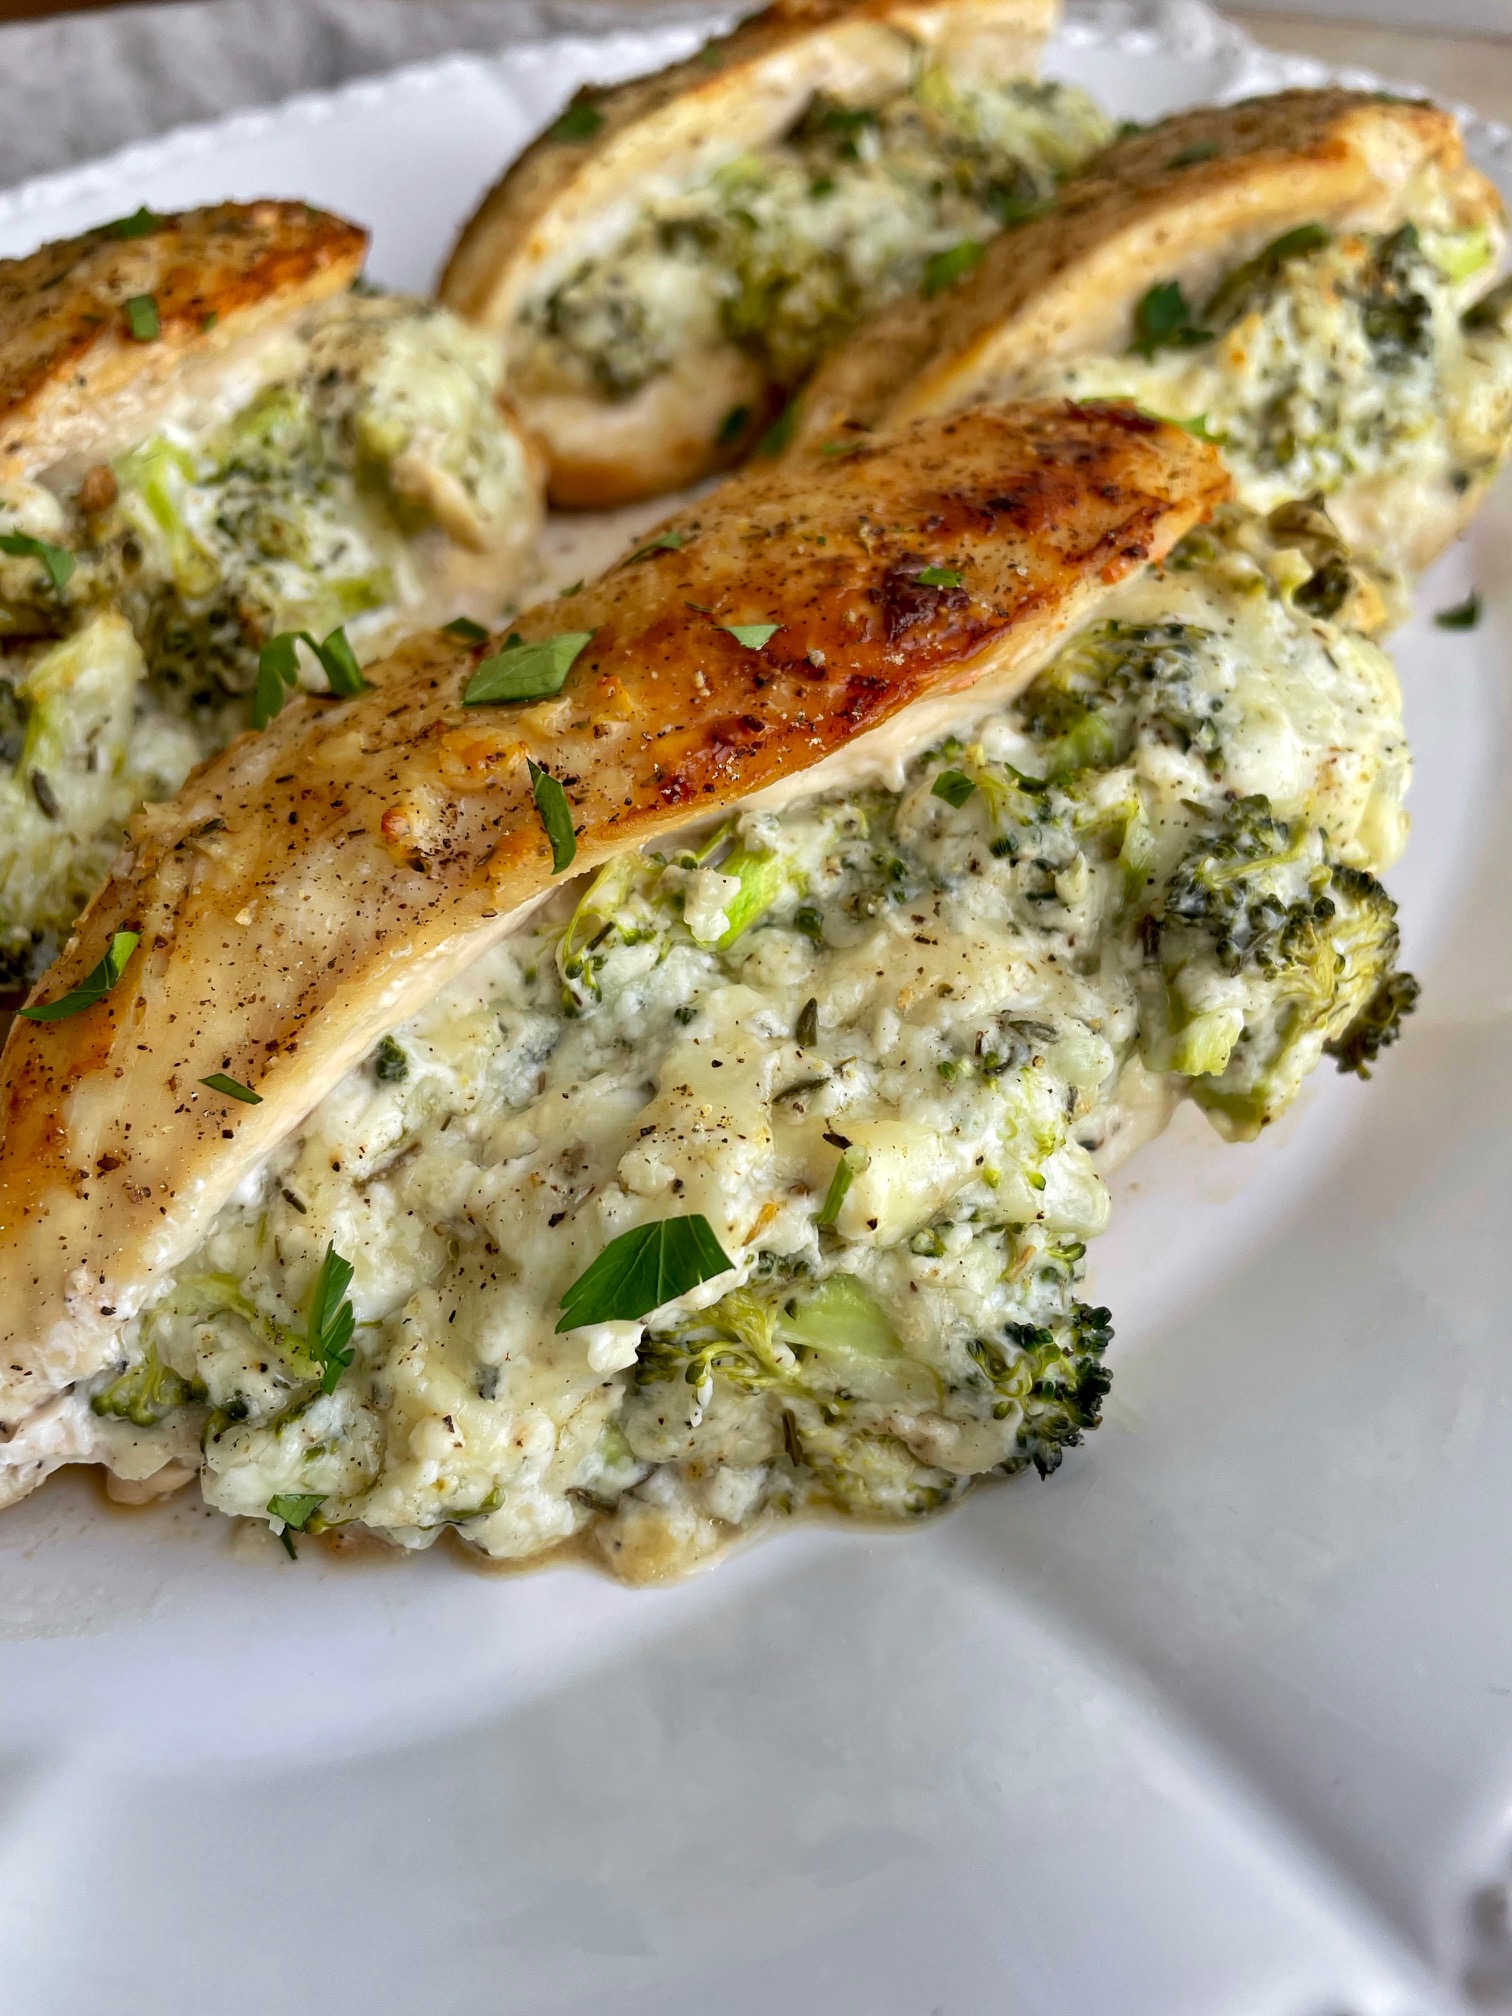 Broccoli and Cheese Stuffed Chicken Breasts